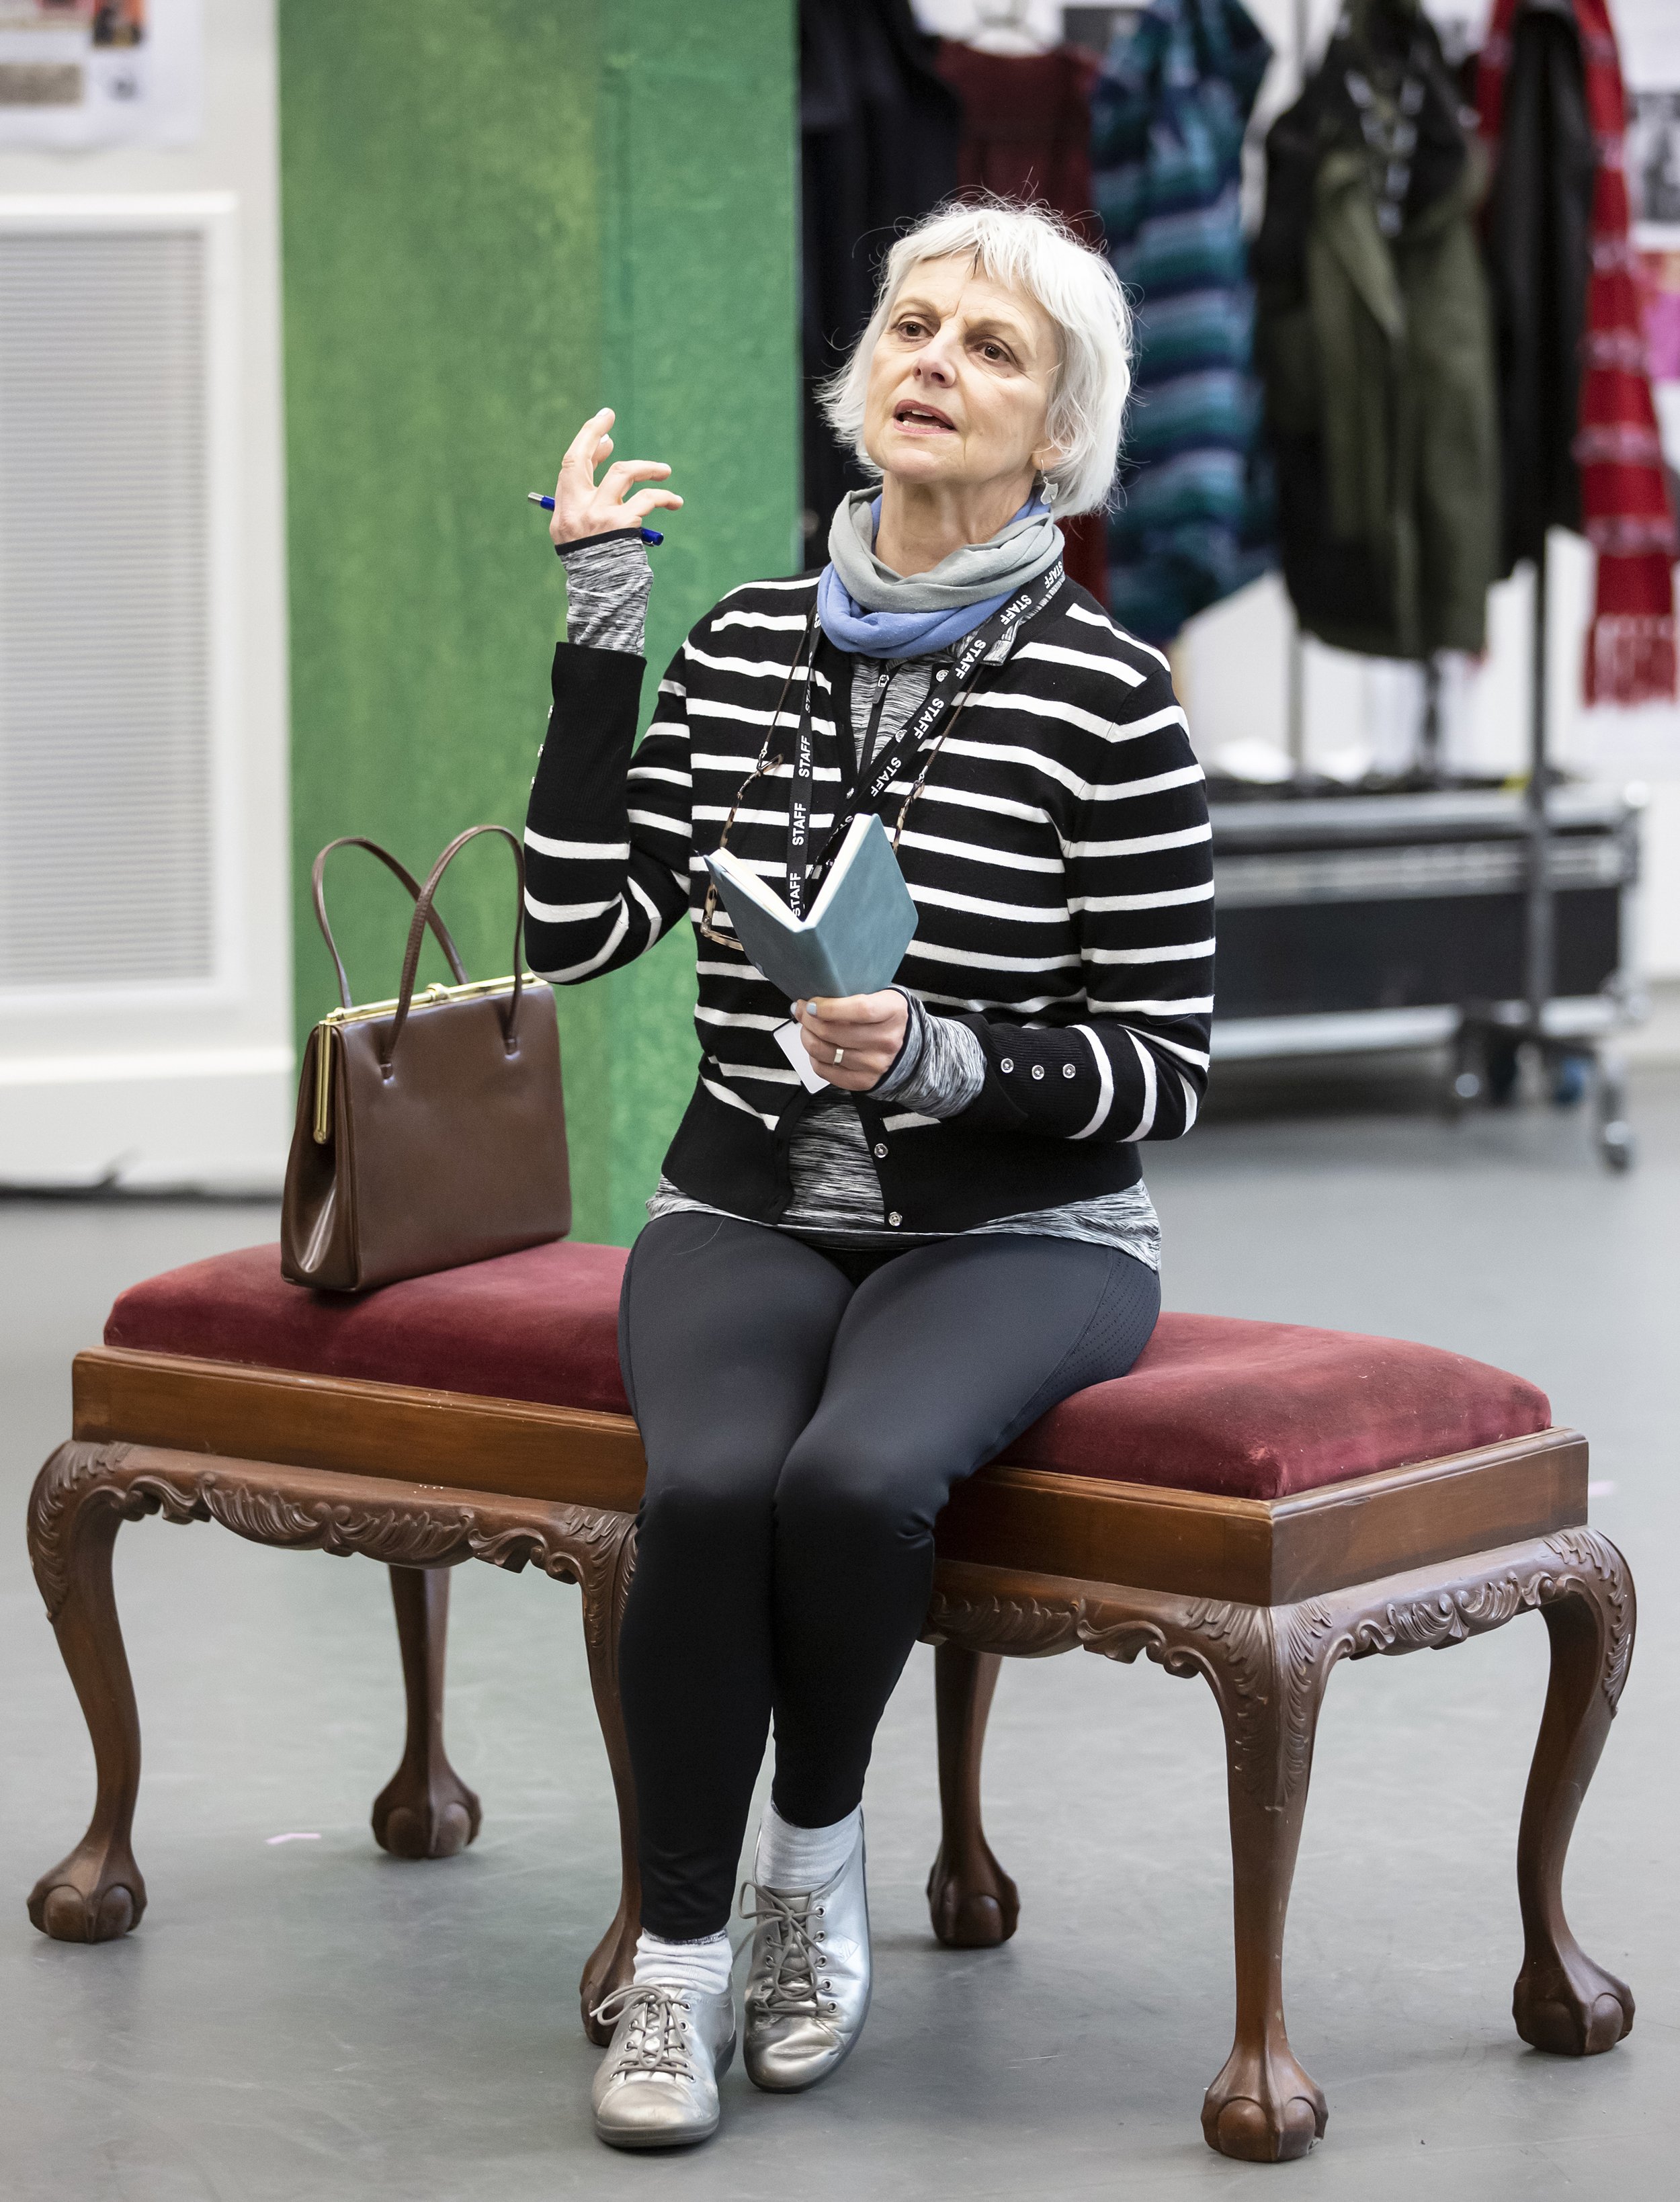 057_The Importance of Being Earnest Rehearsals_Pamela Raith Photography.jpg